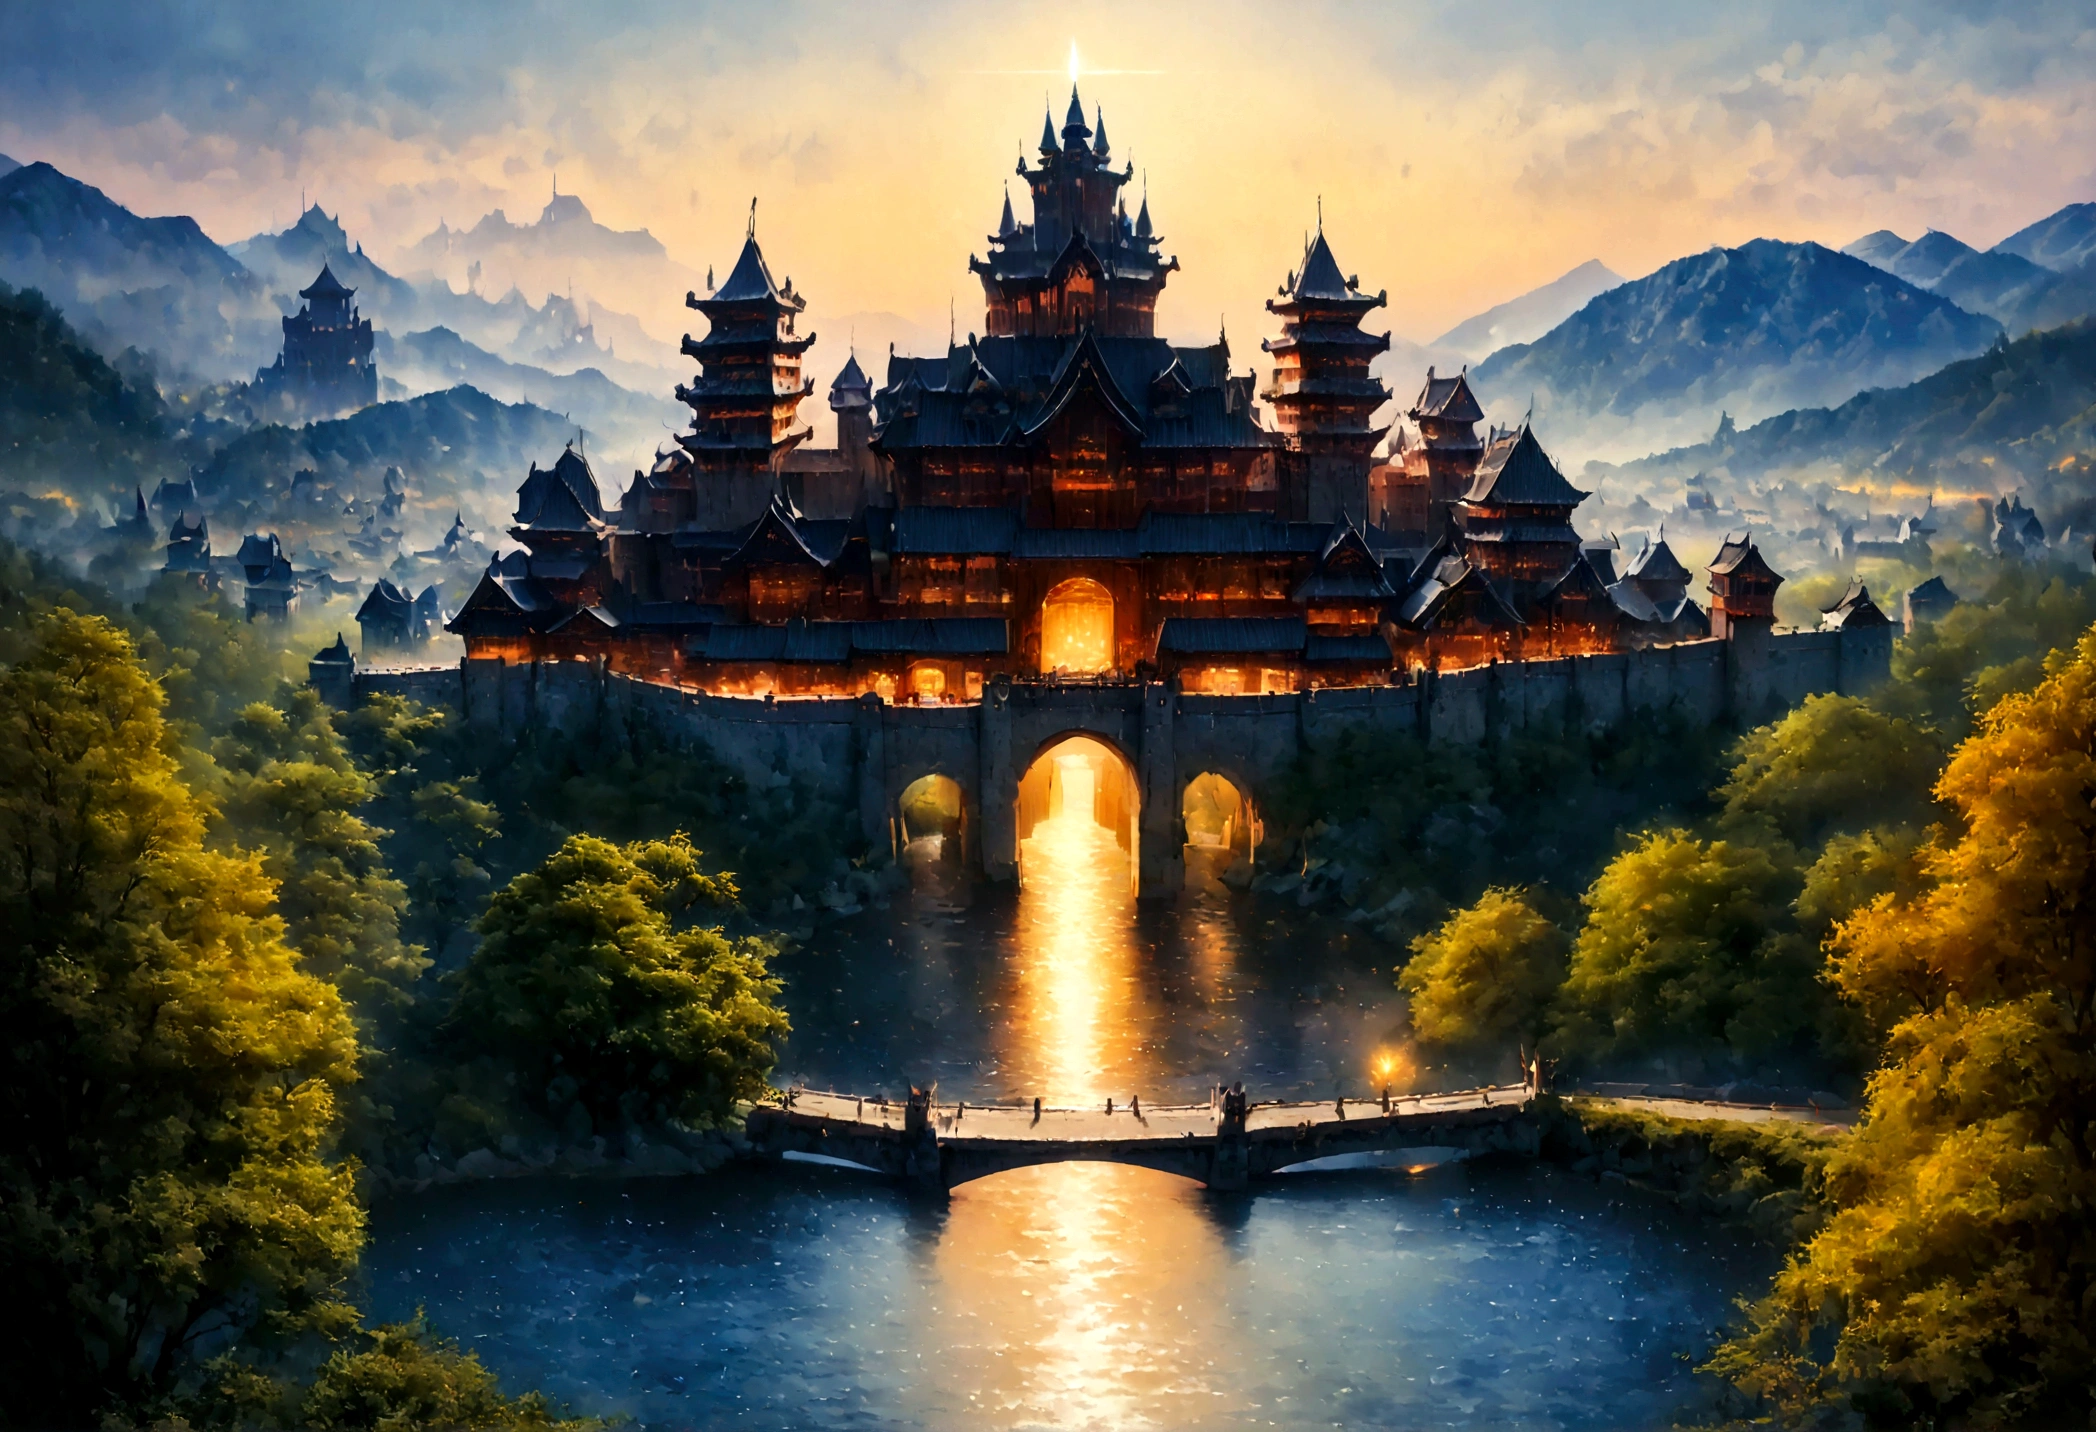 an award winning picture, National Geographic style, Arafed, magnificent artistic picture of a (Japanese medieval castle: 1.4) (masterpiece, best detailed: 1.4)on a mountain range near a lake at dusk, fantasy art D&D art, castle, with towers, turrets, barbican, it is dusk time, the sun is going down, and there are stars in the skies, the last rays of sun, there is a ((bridge lit by torches: 1.4)) crossing to the other side, the castle is being reflected in the water, mist rising from the water, fantasy forest background, ultra best realistic, best details, 16k, [ultra detailed], masterpiece, best quality, (extremely detailed), photorealism, depth of field, hyper realistic painting, digital art